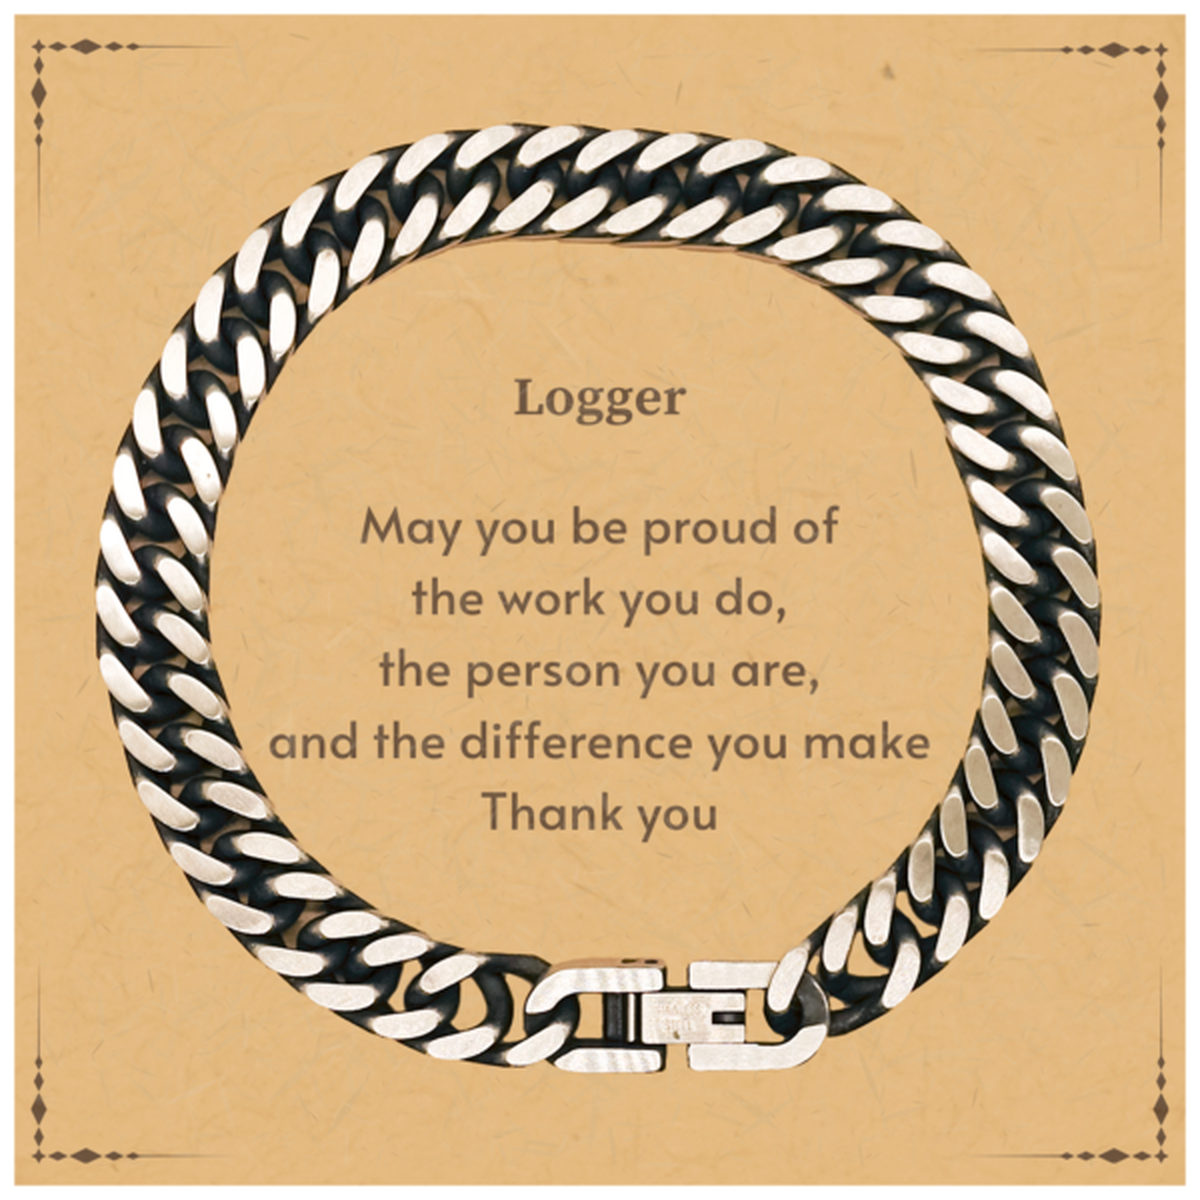 Heartwarming Cuban Link Chain Bracelet Retirement Coworkers Gifts for Logger, Logger May You be proud of the work you do, the person you are Gifts for Boss Men Women Friends